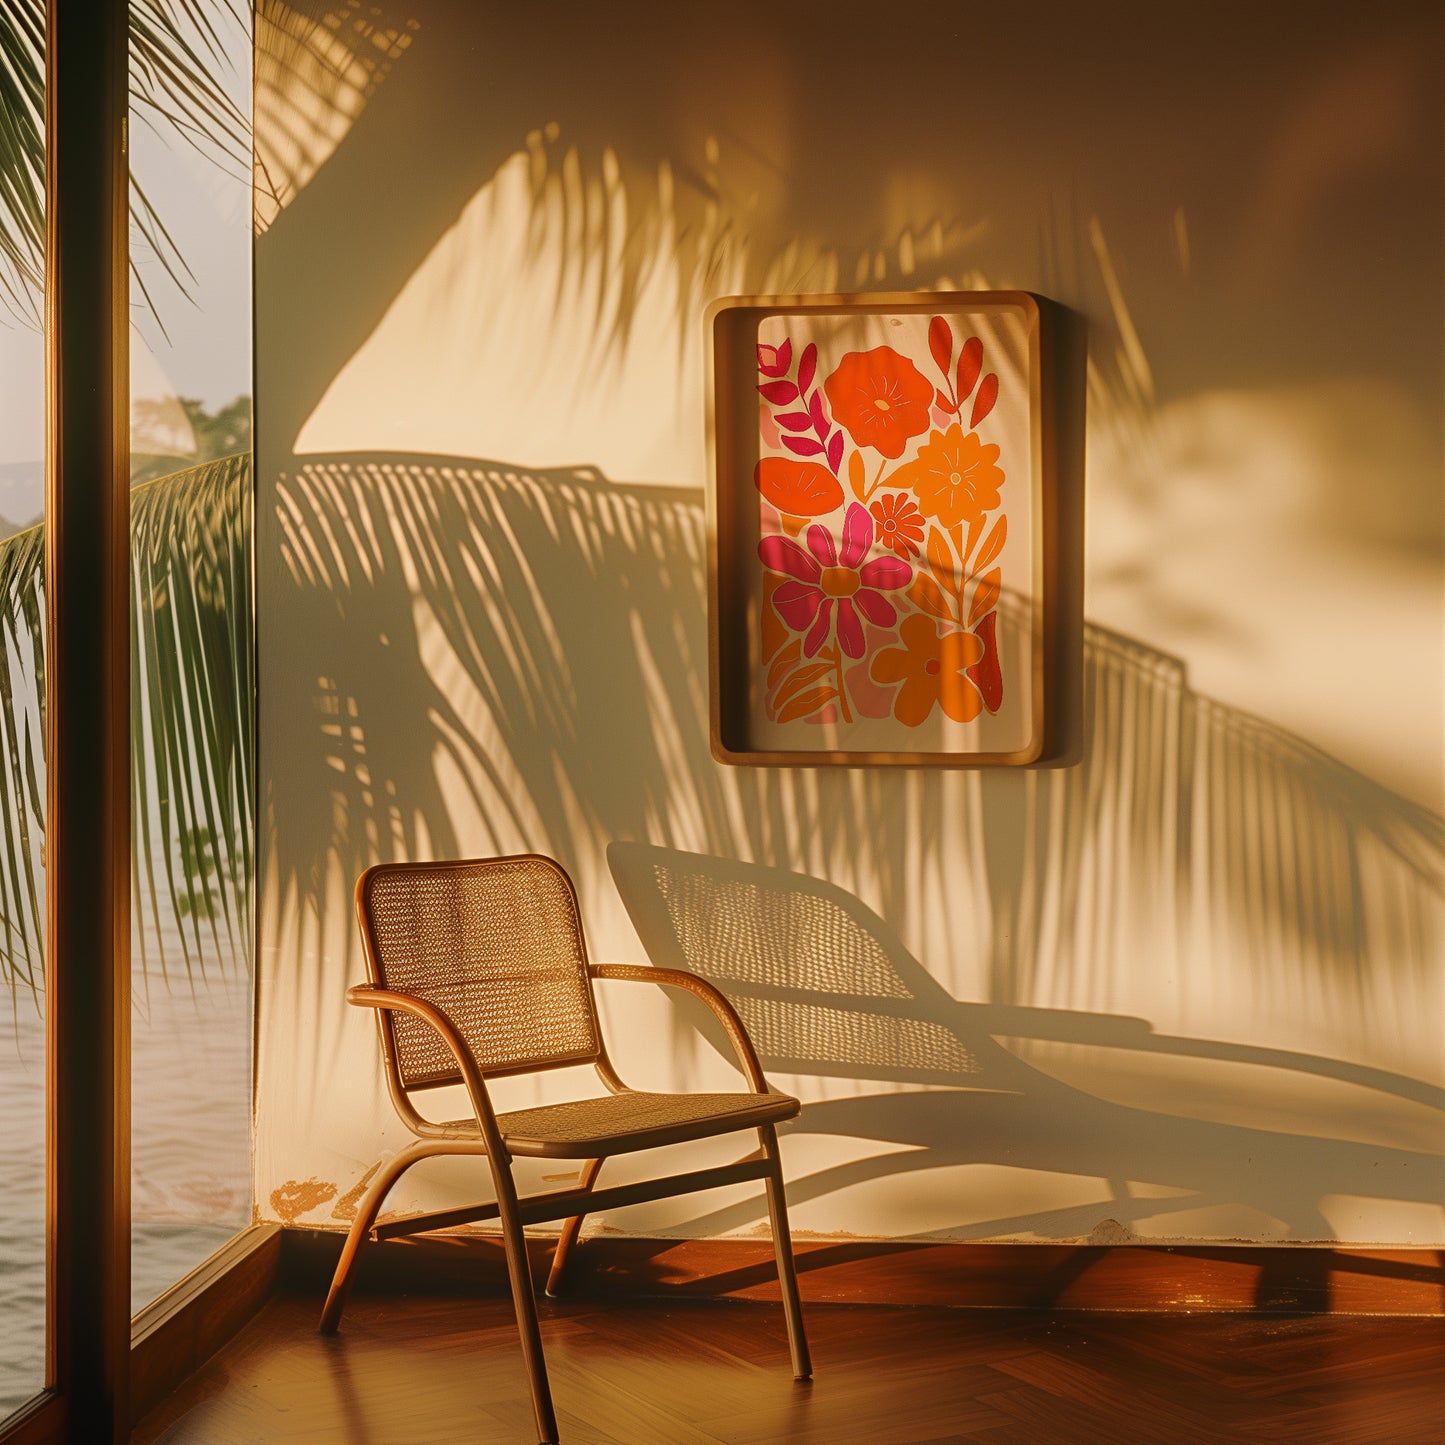 Cozy chair by a window casting shadow on a wall with a floral painting at sunset.